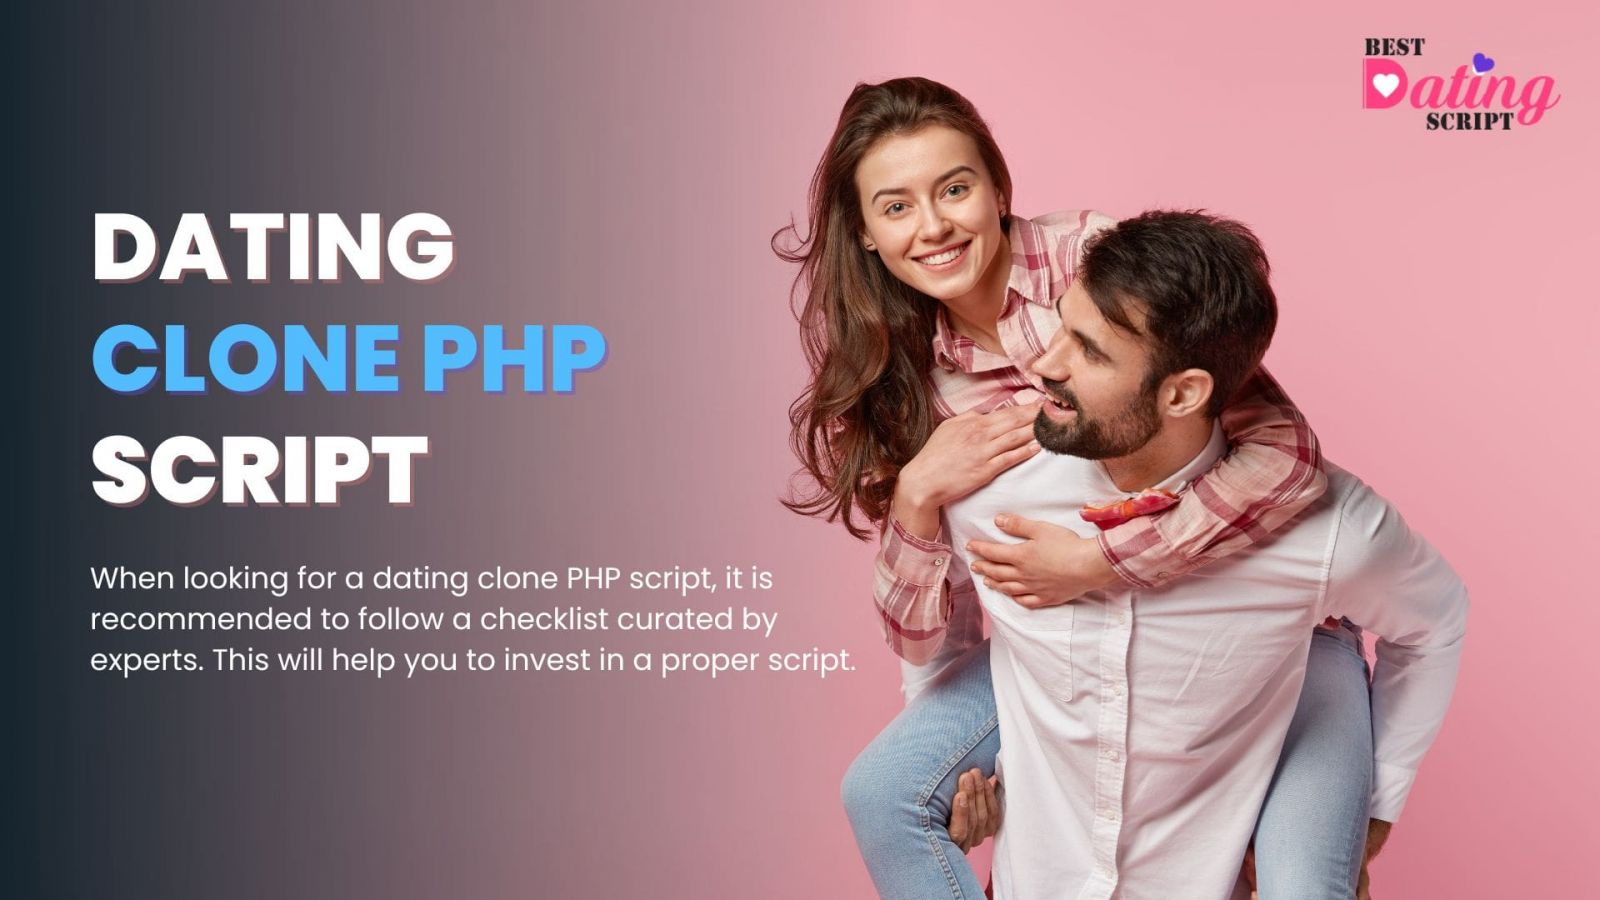 Dating Clone PHP Script